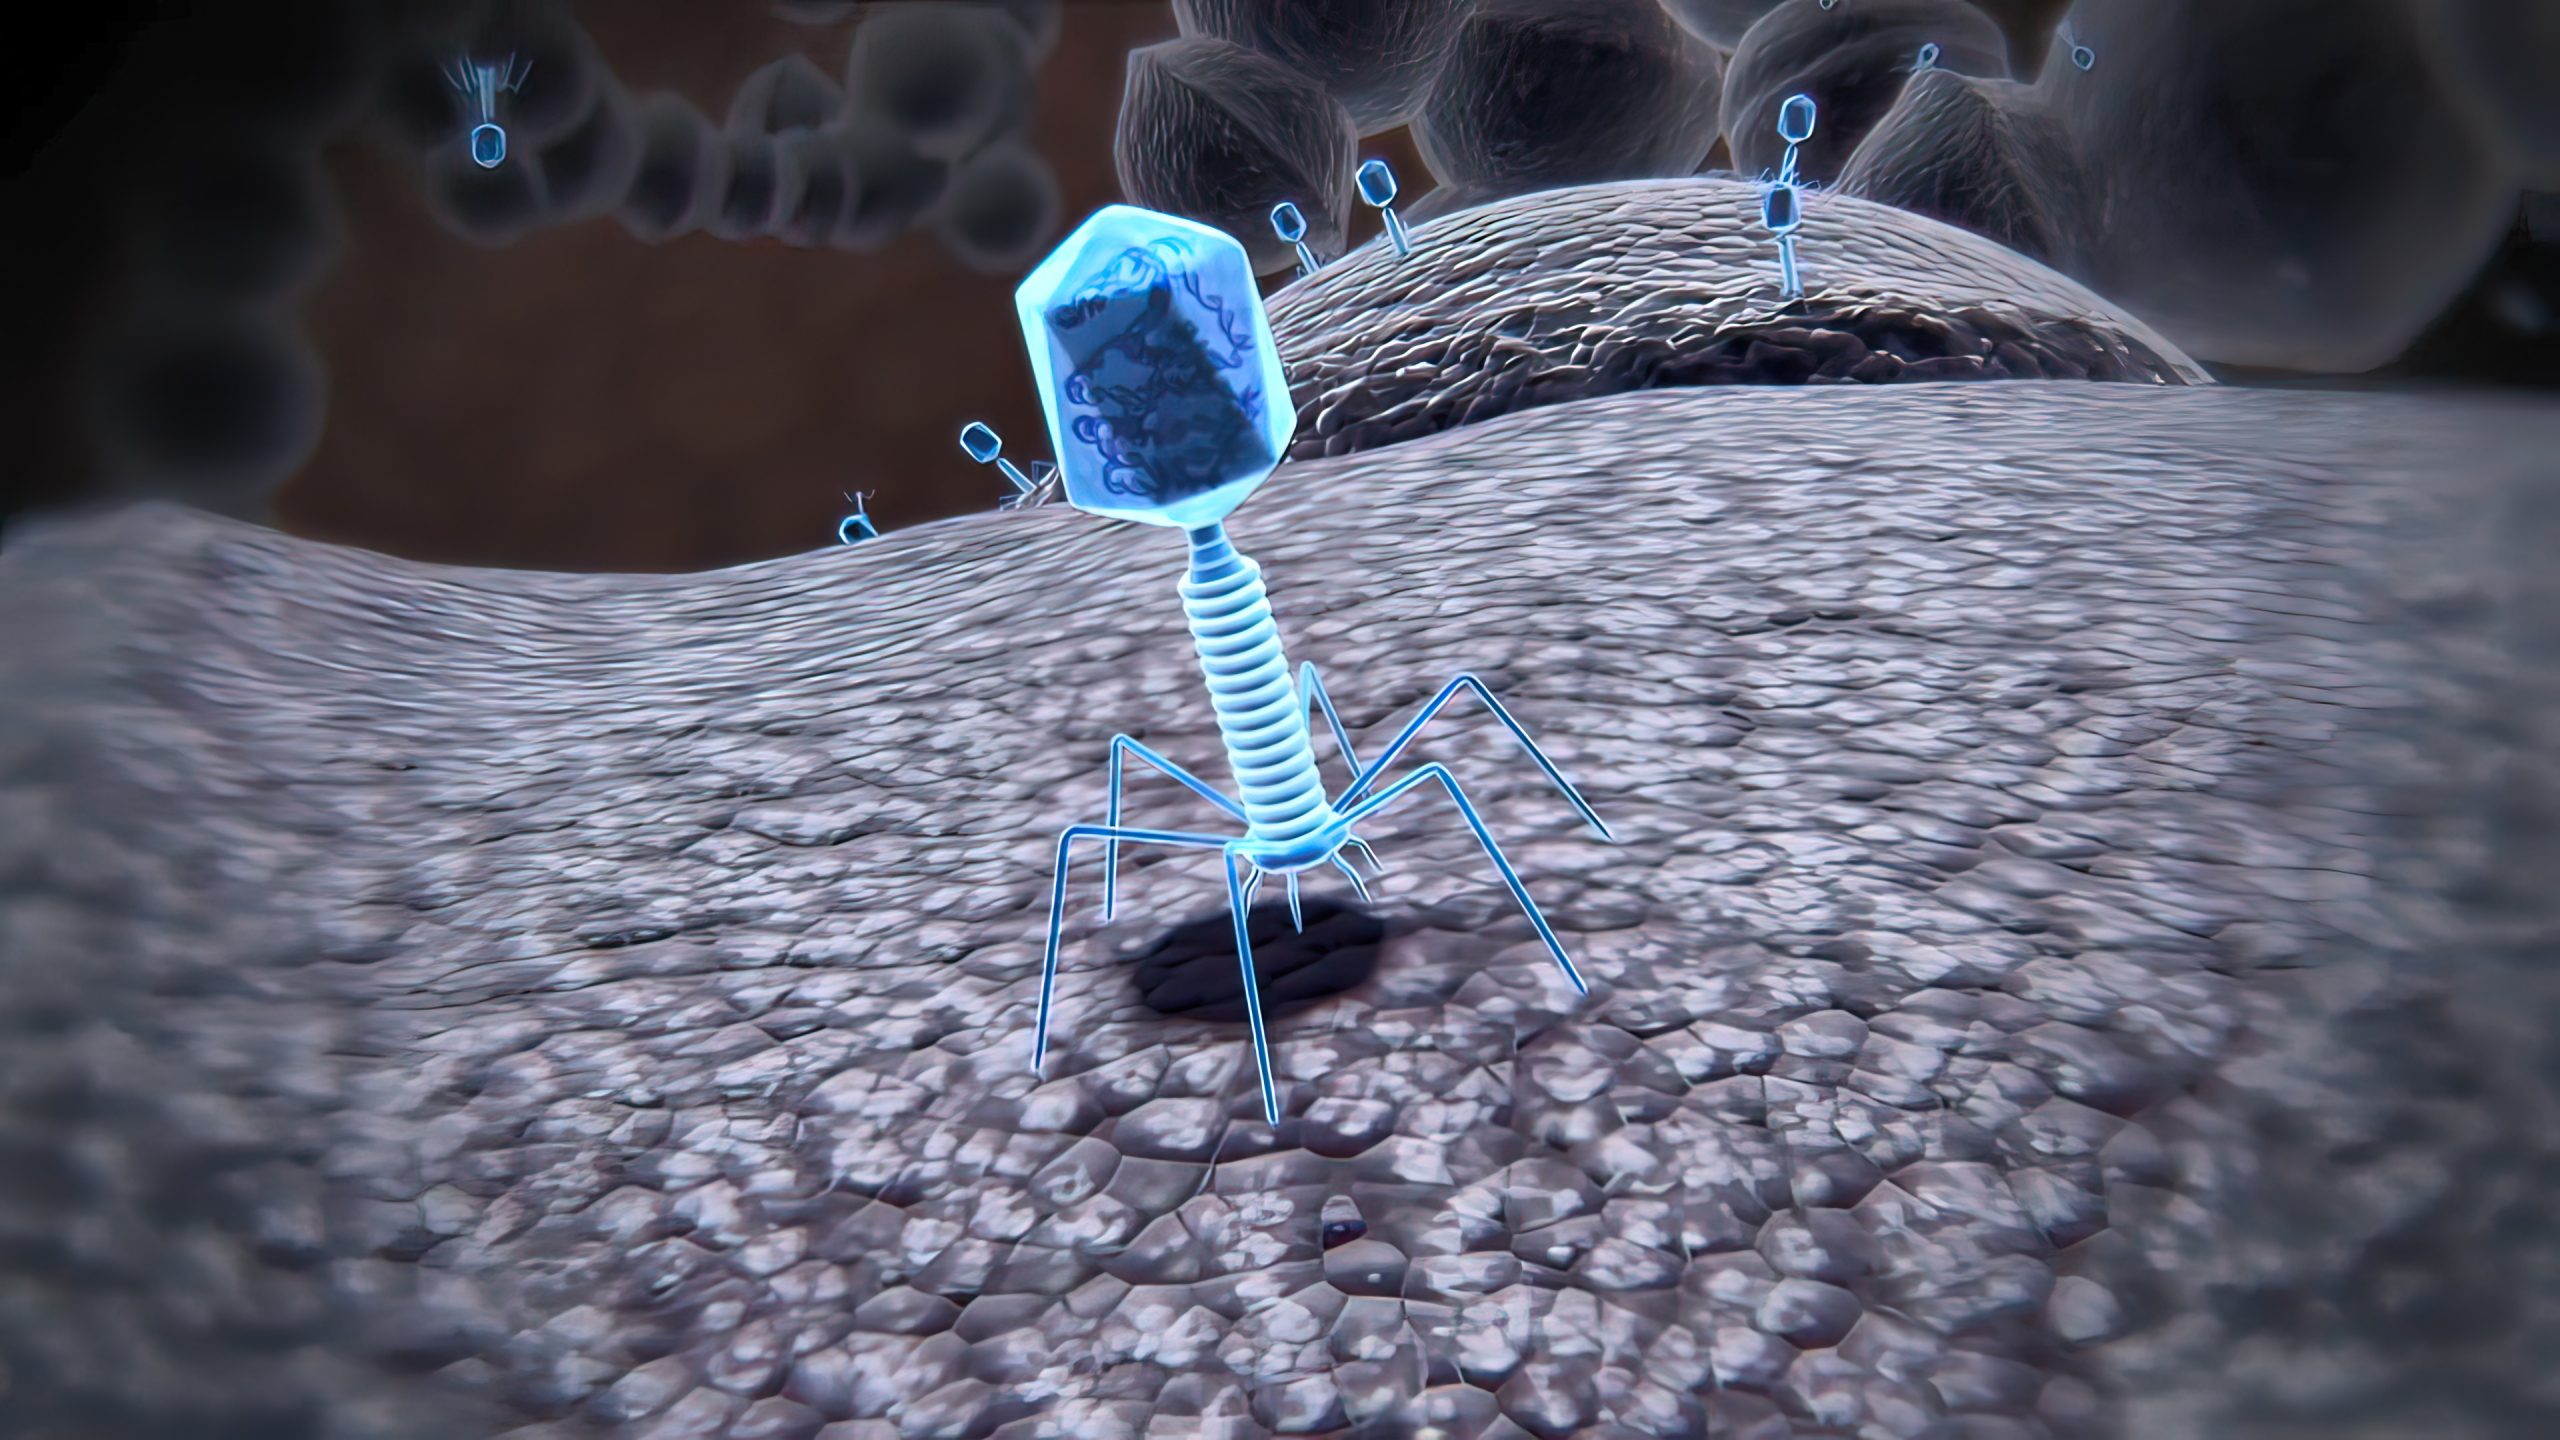 Bacteriophages, also known as phages, are viruses that specifically infect and parasitize bacteria. They are composed of nucleic acid and proteins, and have a shape resembling a needle with a polygon. Source｜iStock